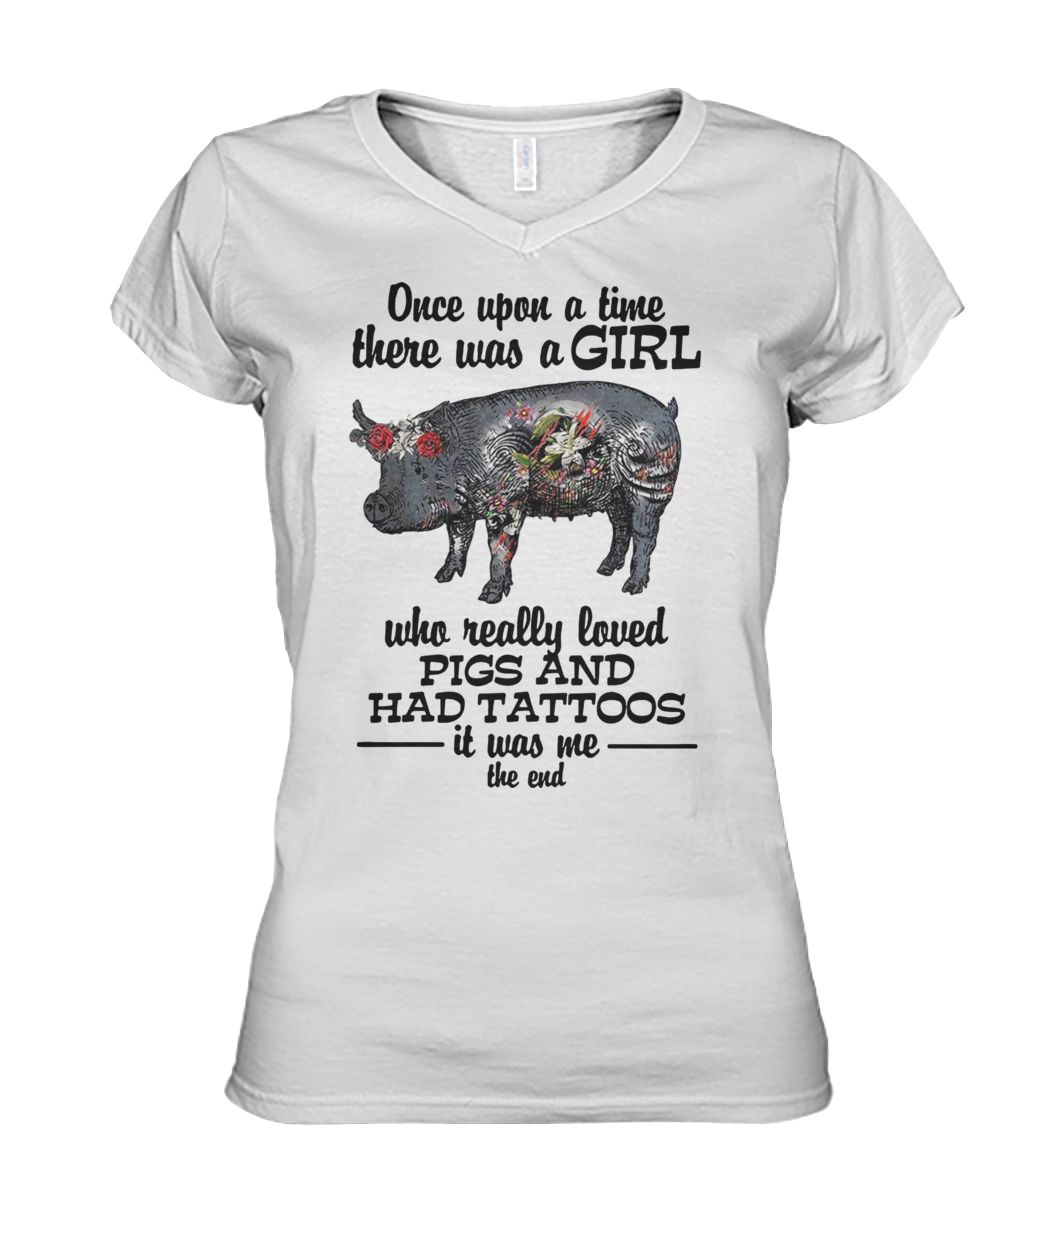 Once upon a time there was a girl who really loved pigs and had tattoos it was me women's v-neck